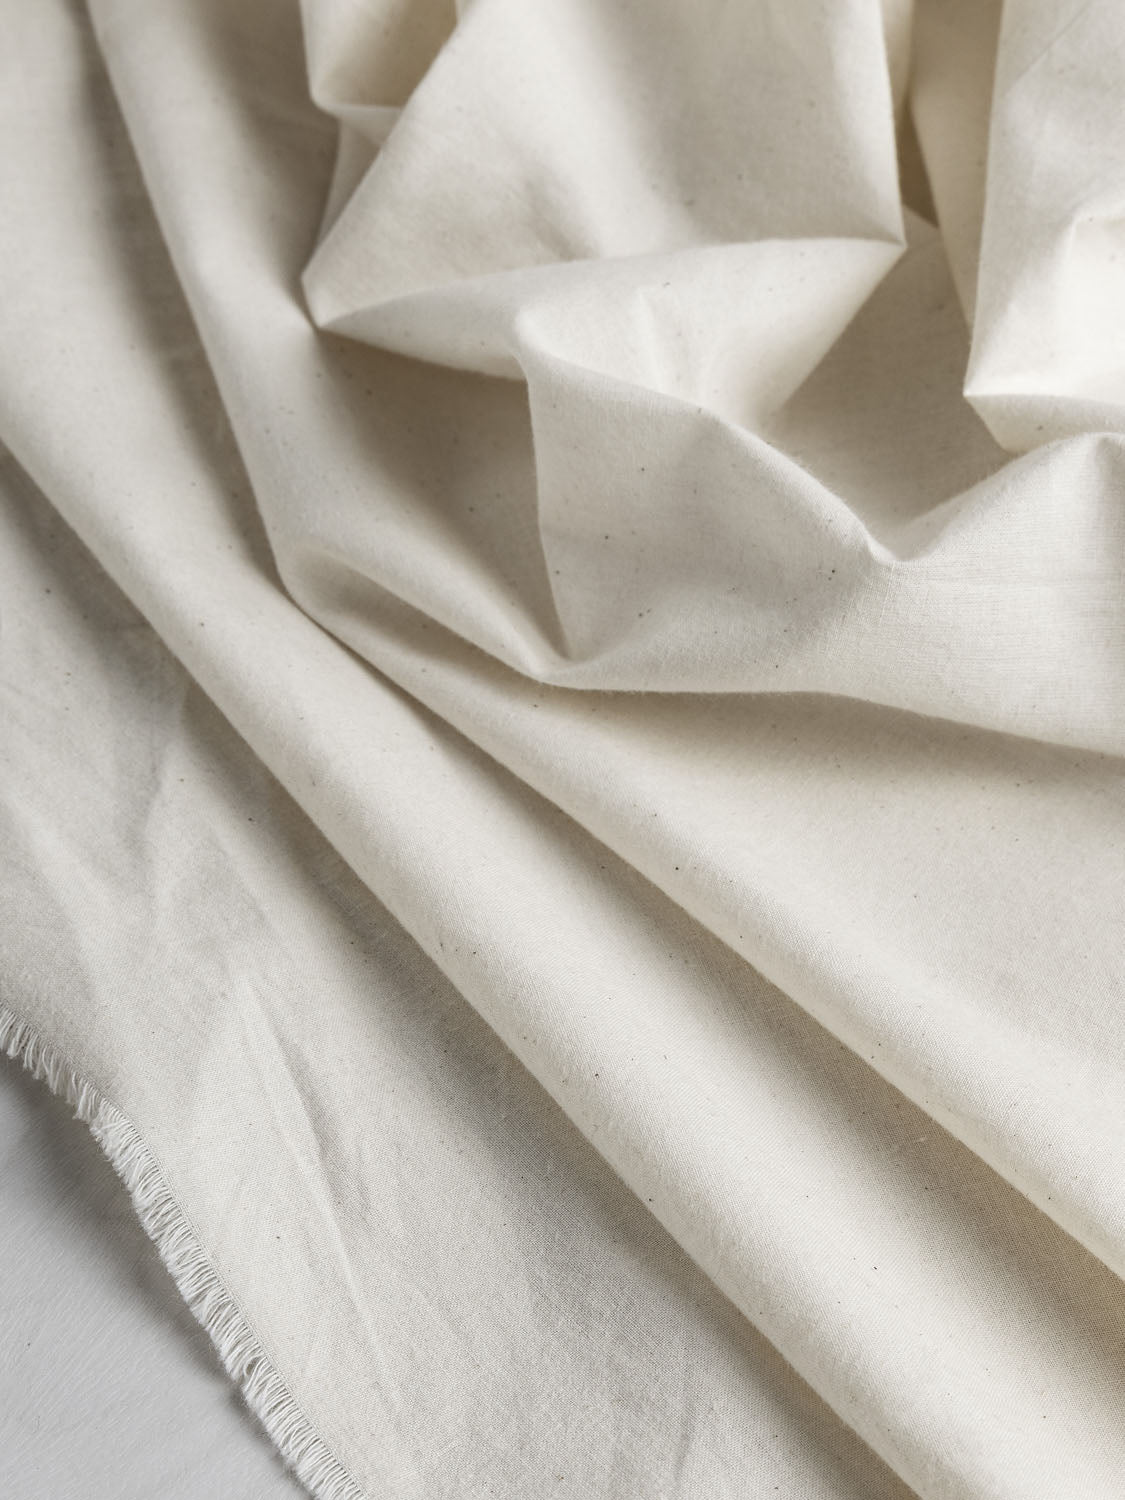 Recycled Lightweight Non-Woven Interfacing - White